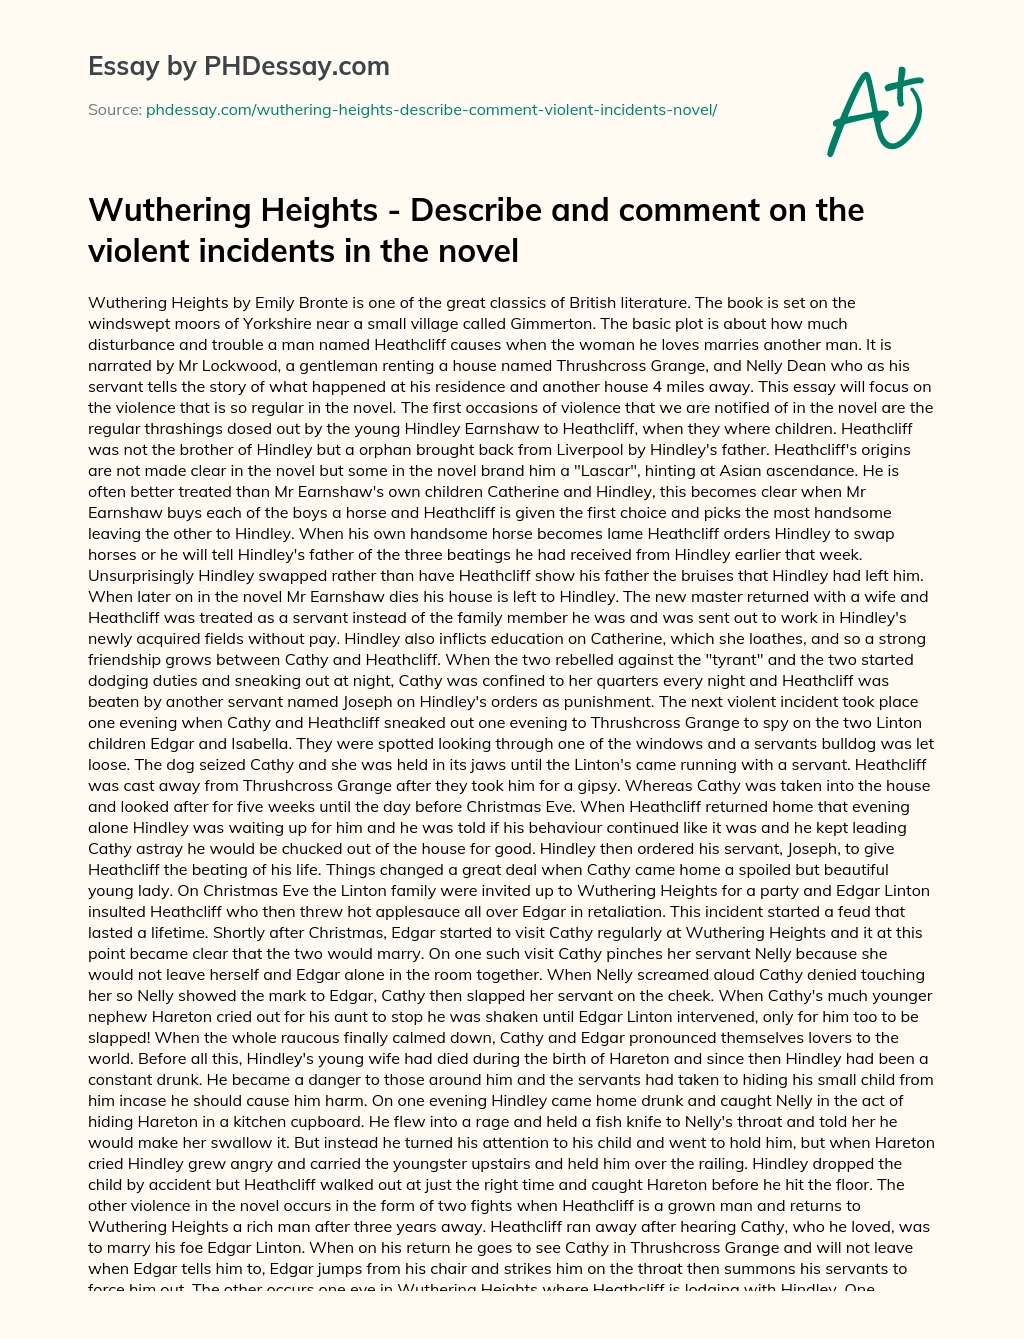 Wuthering Heights – Describe and comment on the violent incidents in the novel essay